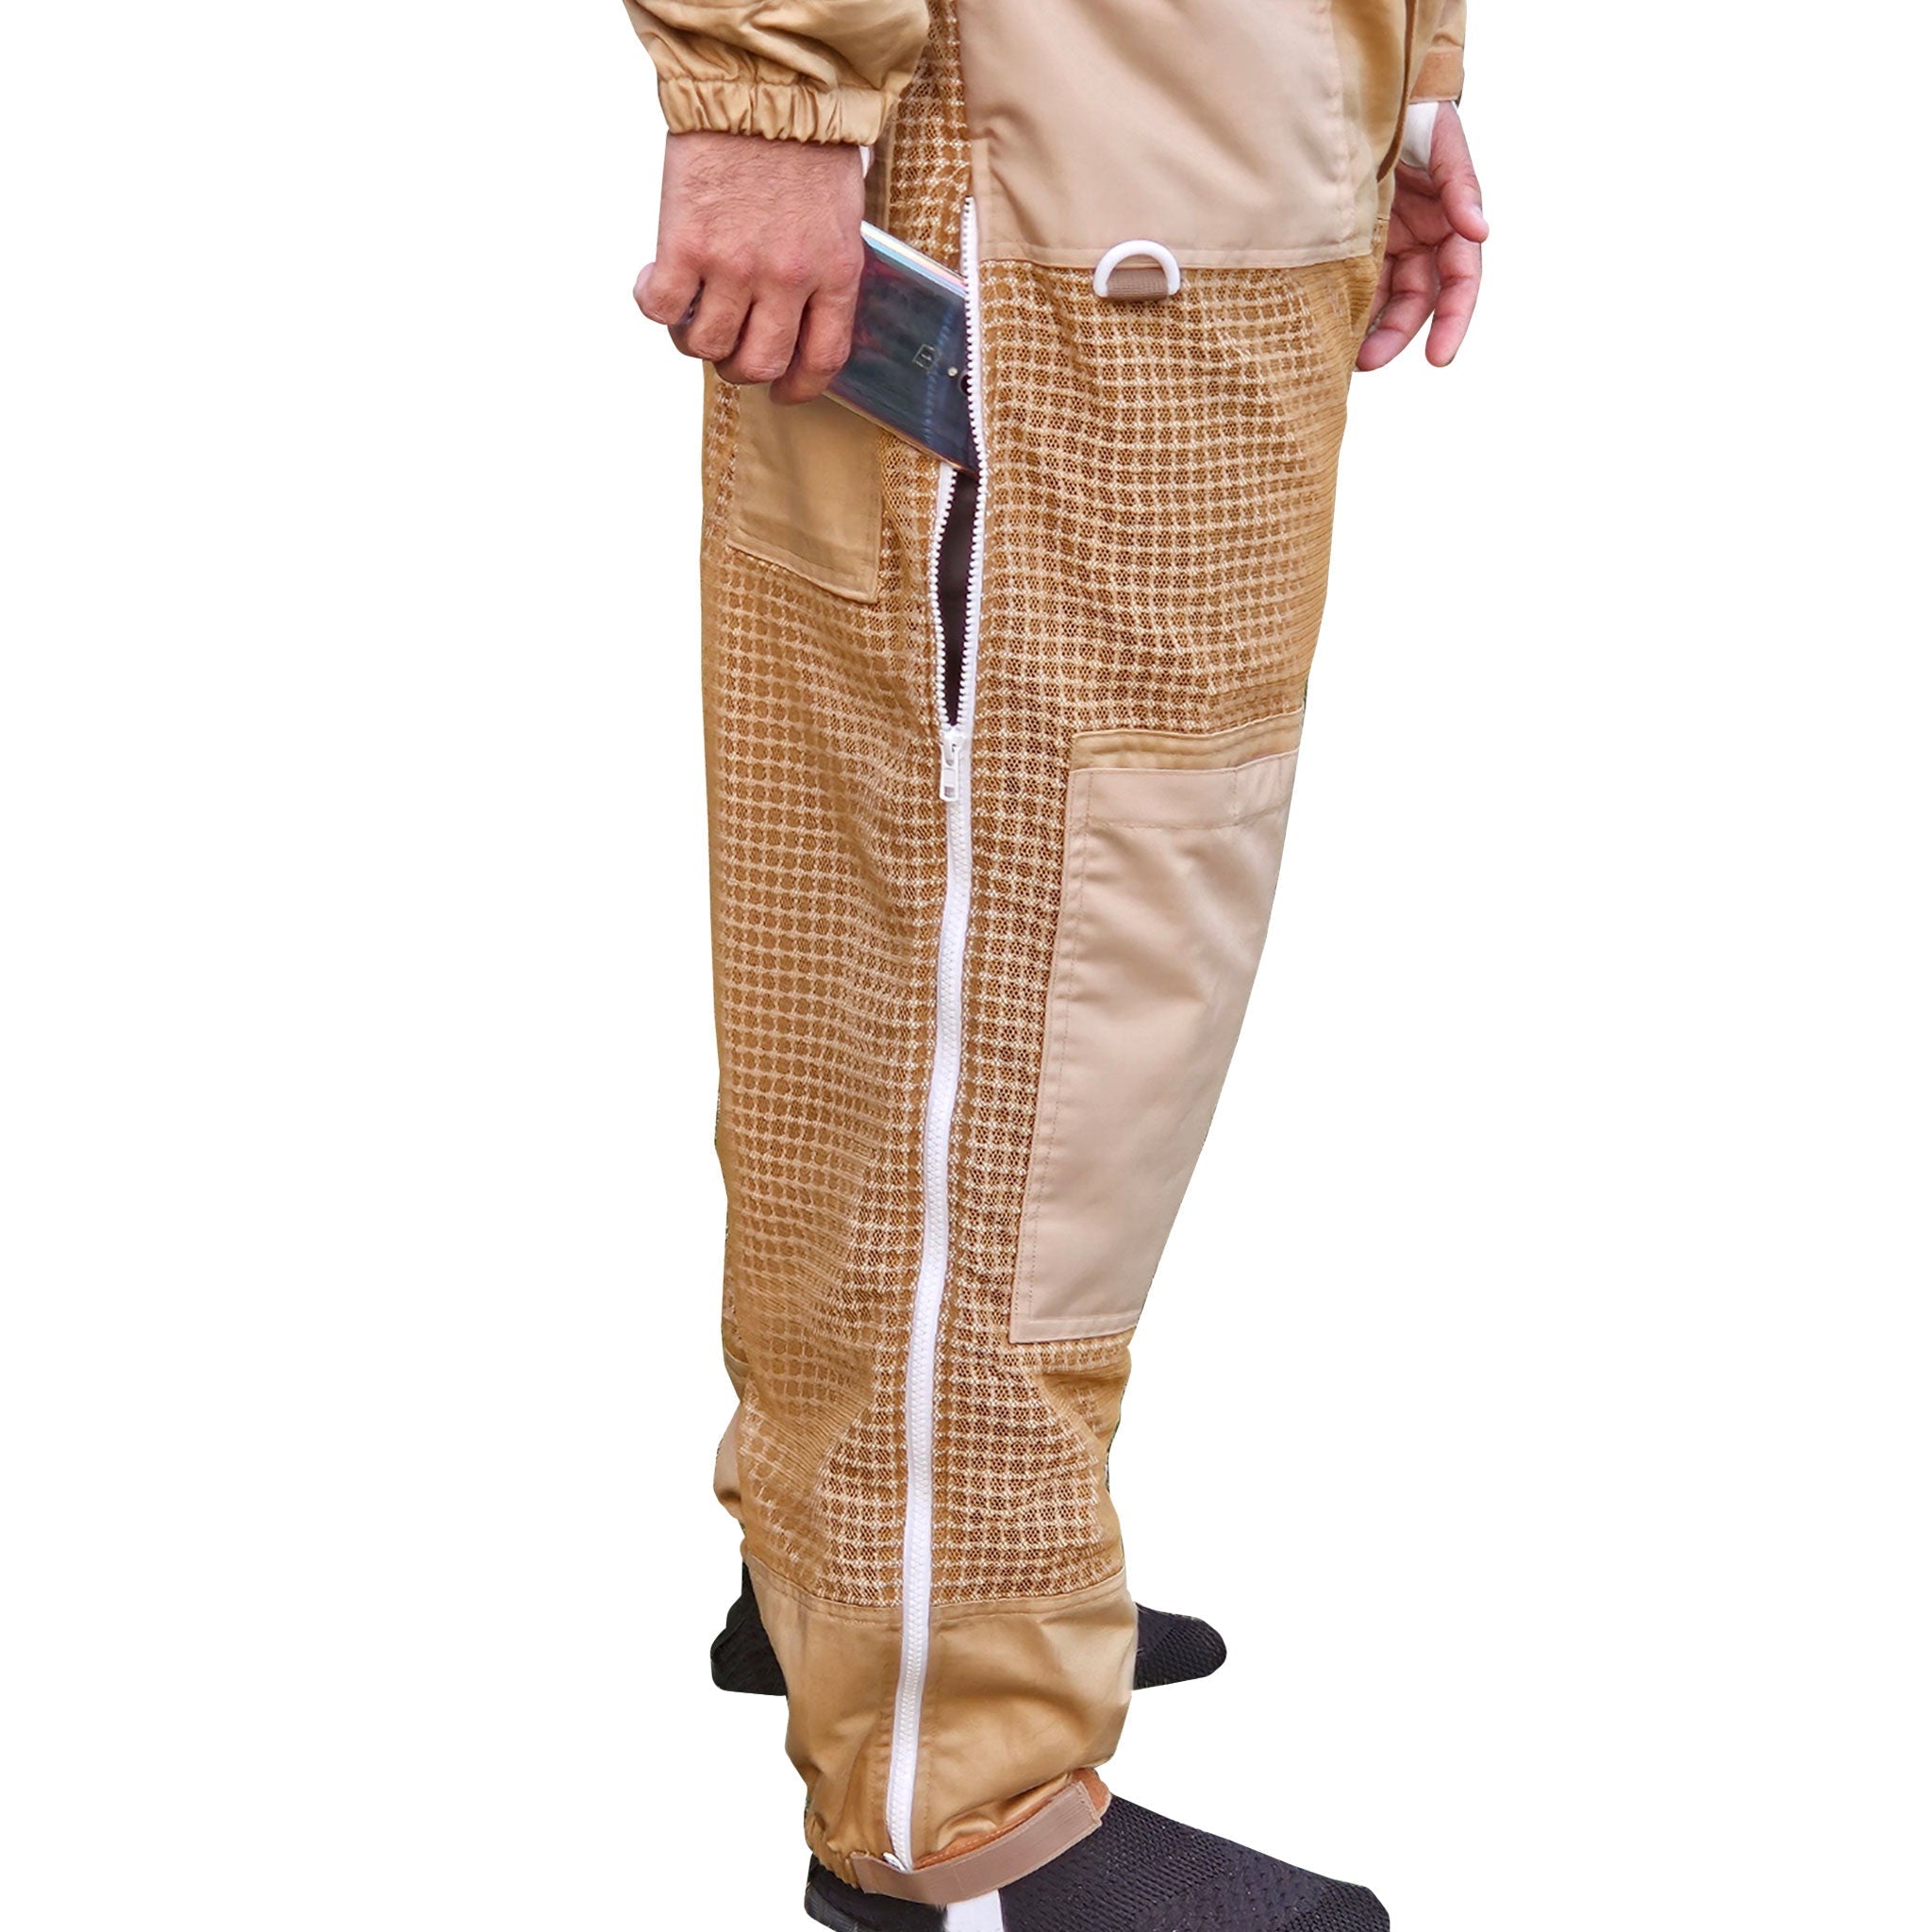 OZ ARMOUR 3 LAYER MESH VENTILATED BEEKEEPING TROUSER 